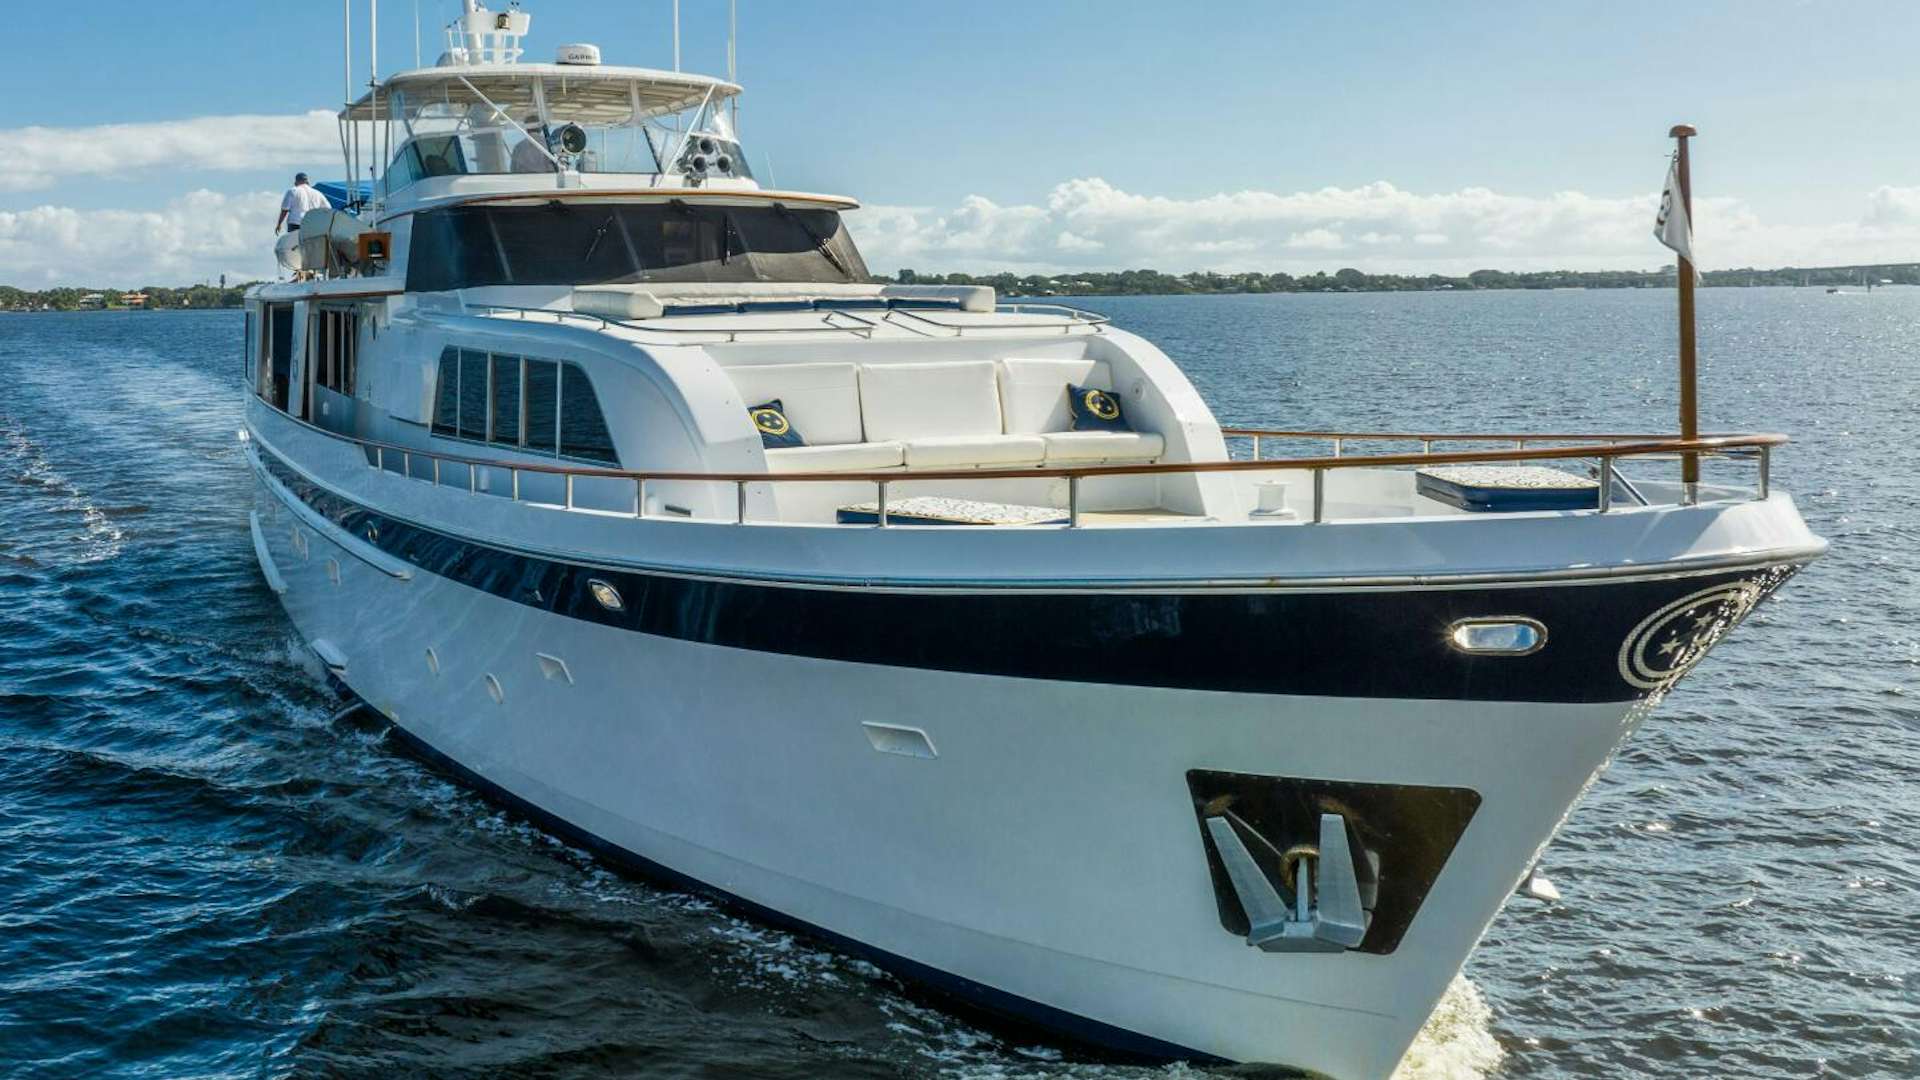 Trilogy
Yacht for Sale